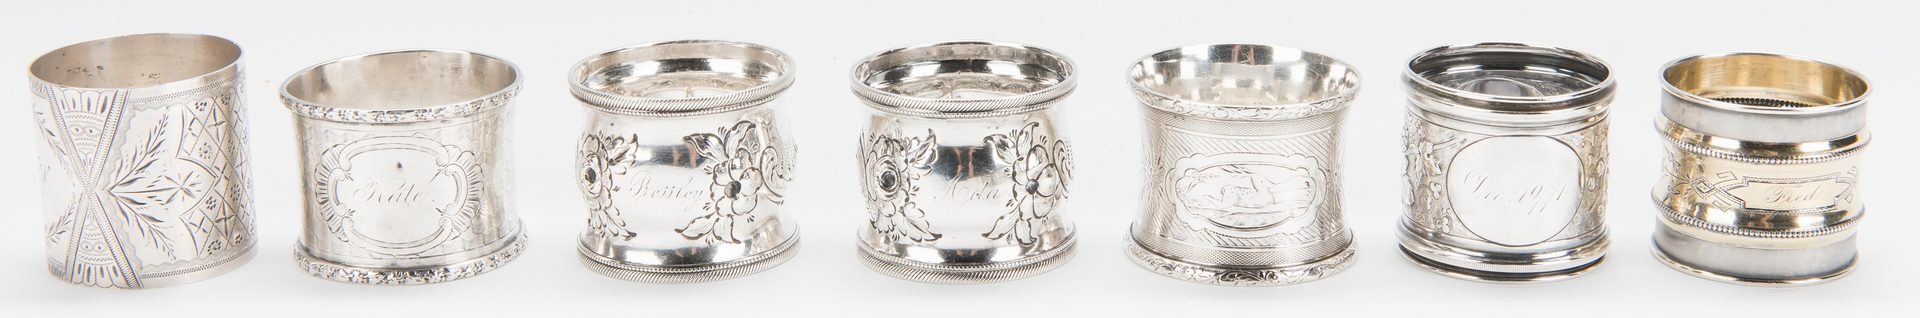 Lot 217: Collection of 23 Silver Napkin Rings